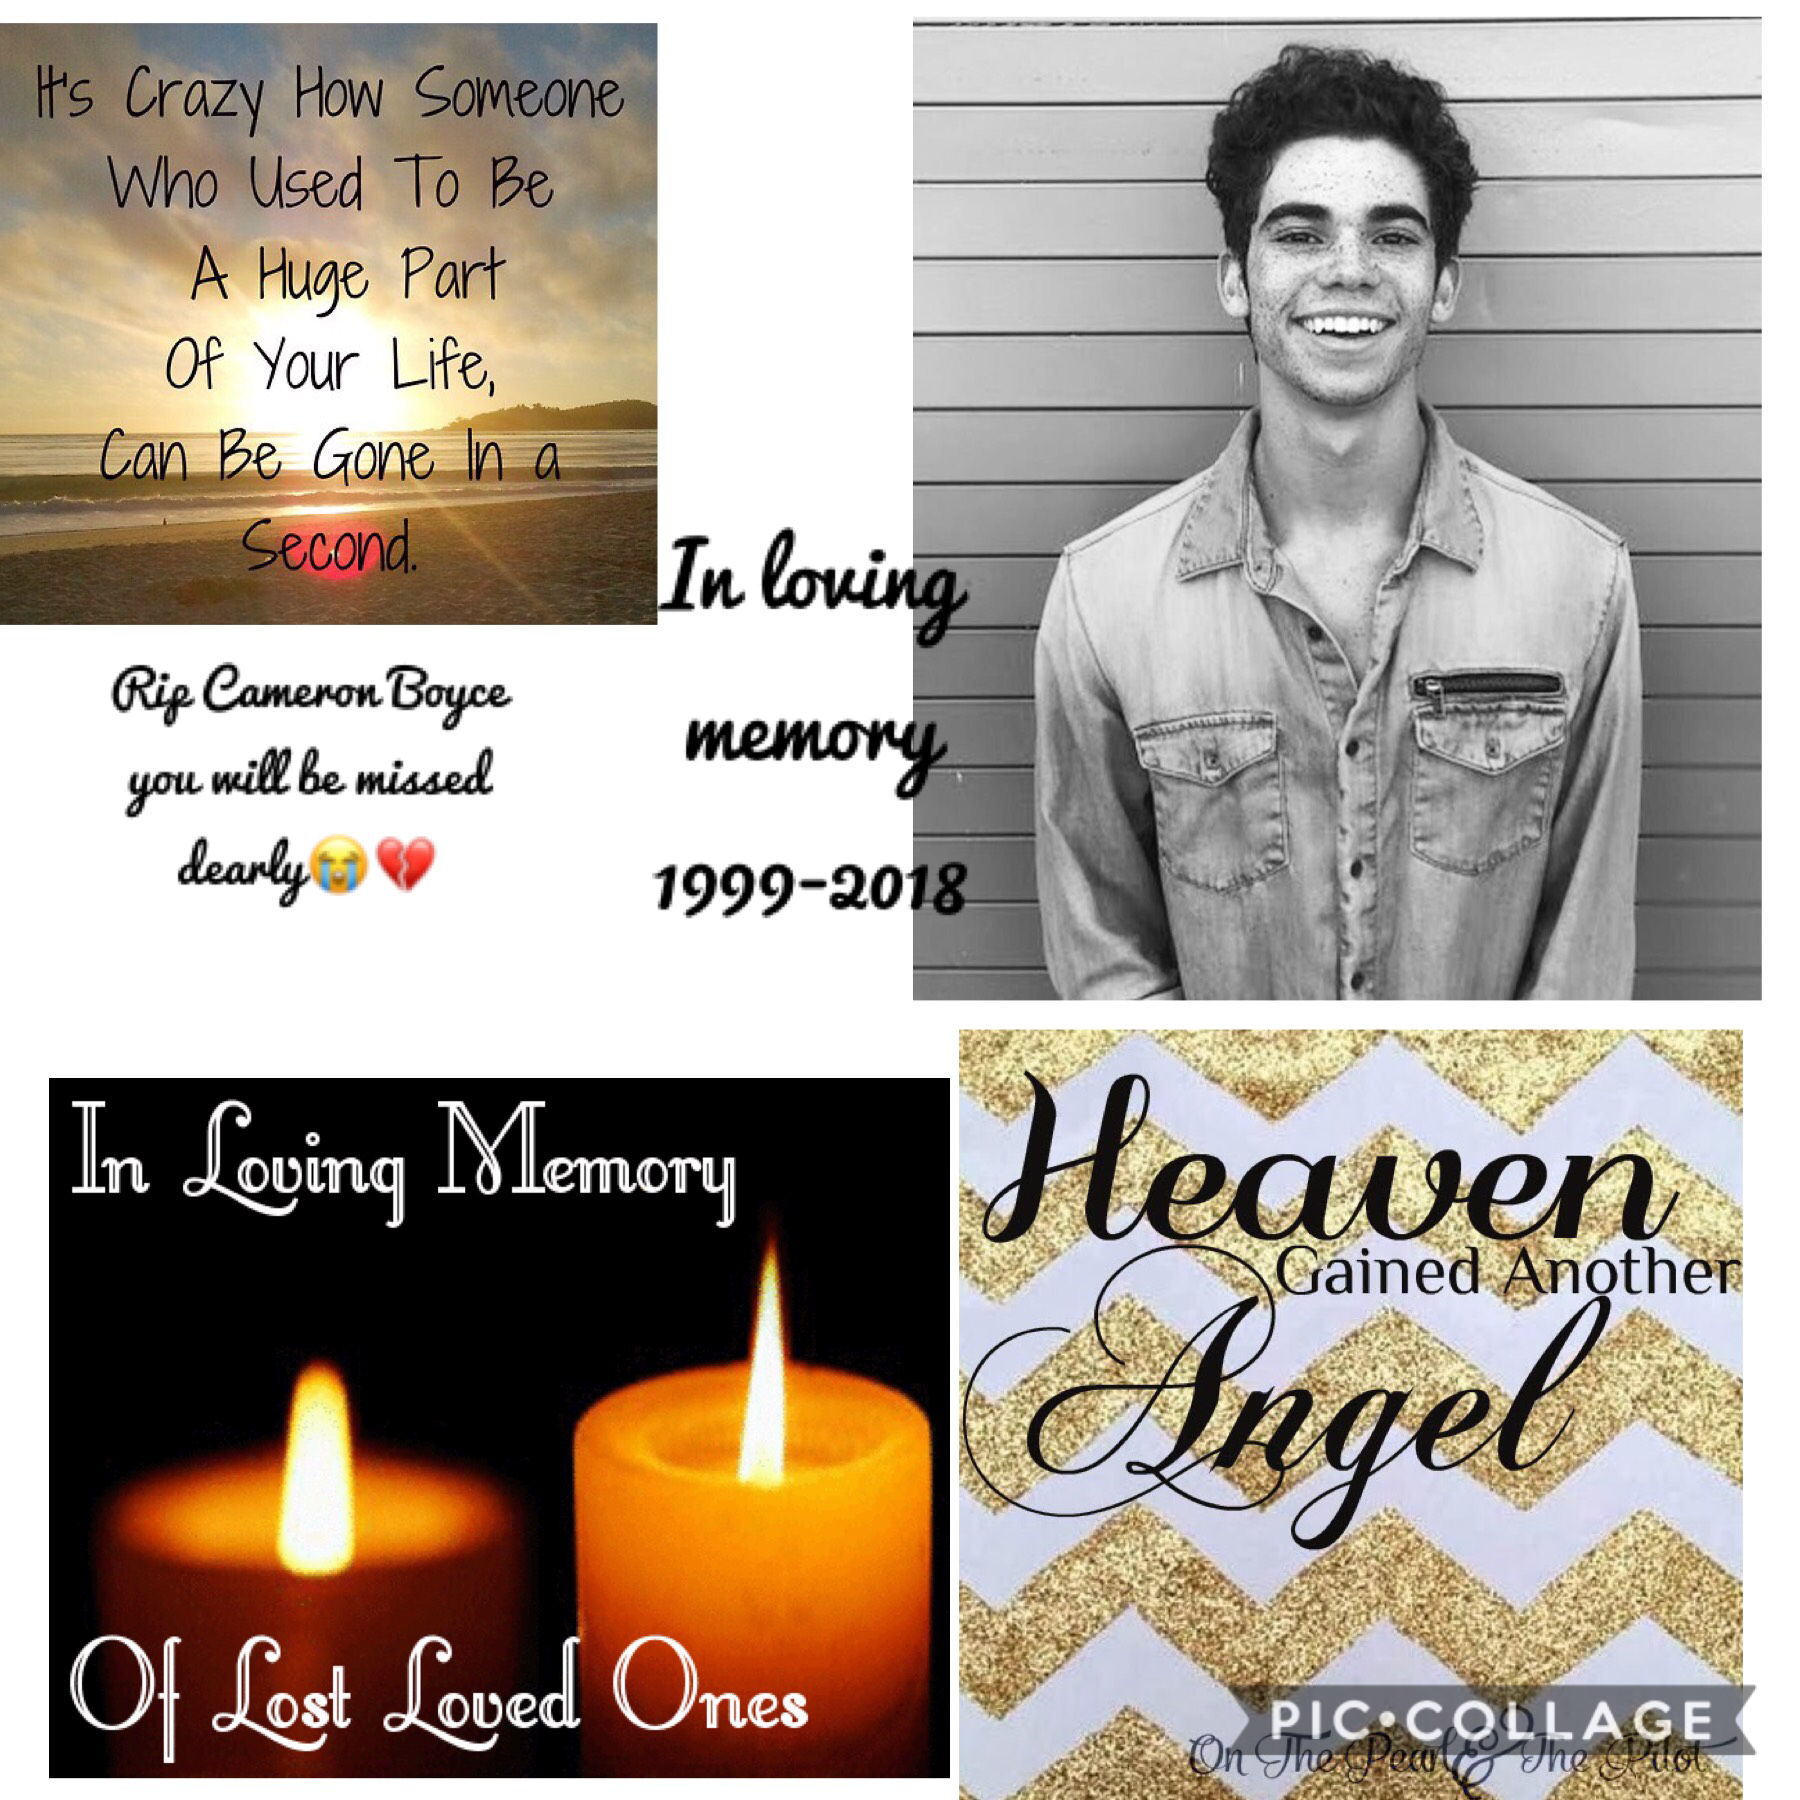 R.I.P CAMERON BOYCE YOU WILL BE MISSED DEARLY😭💔 Prayers going up to his family🙏🏻❤️ Can’t believe your gone but you will never be forgotten❤️❤️